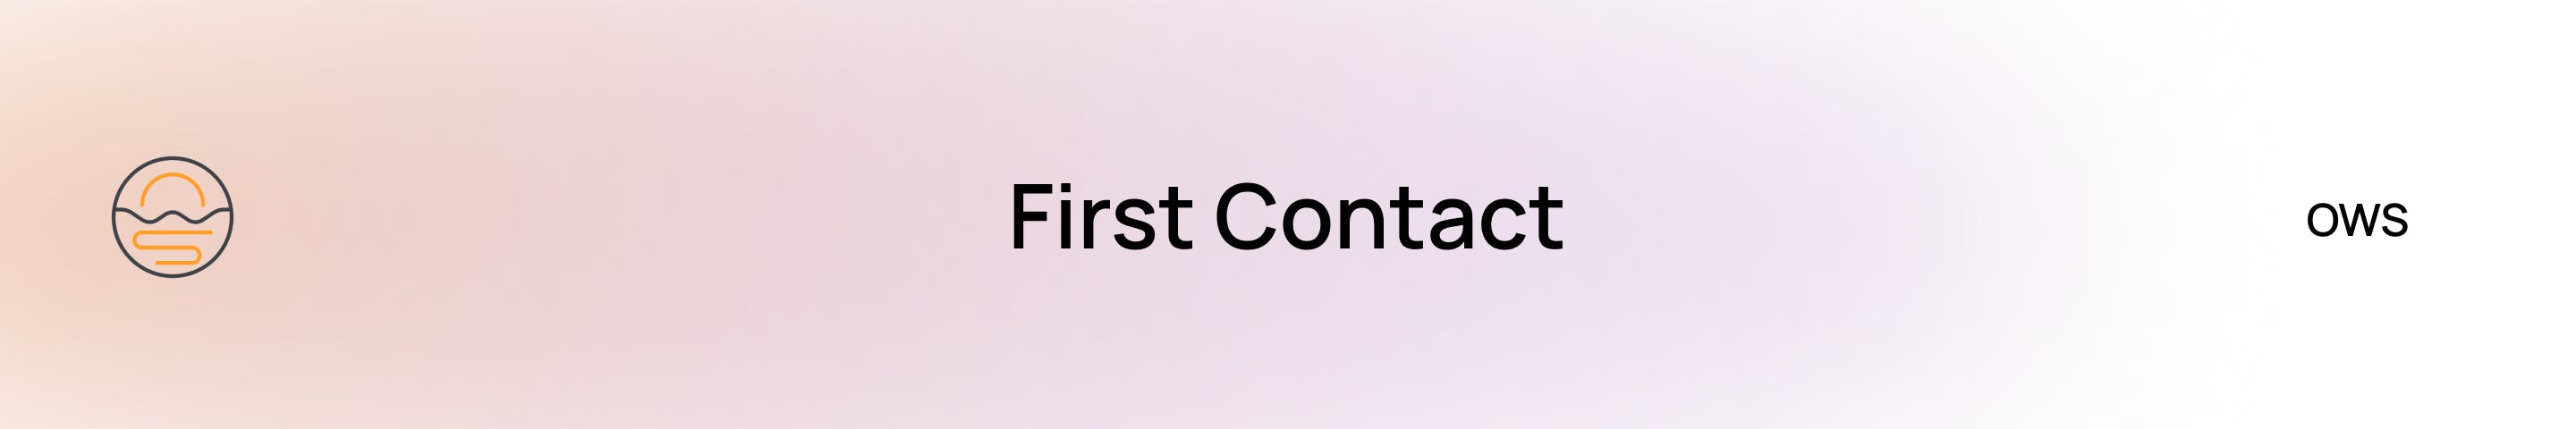 First contact banner.png